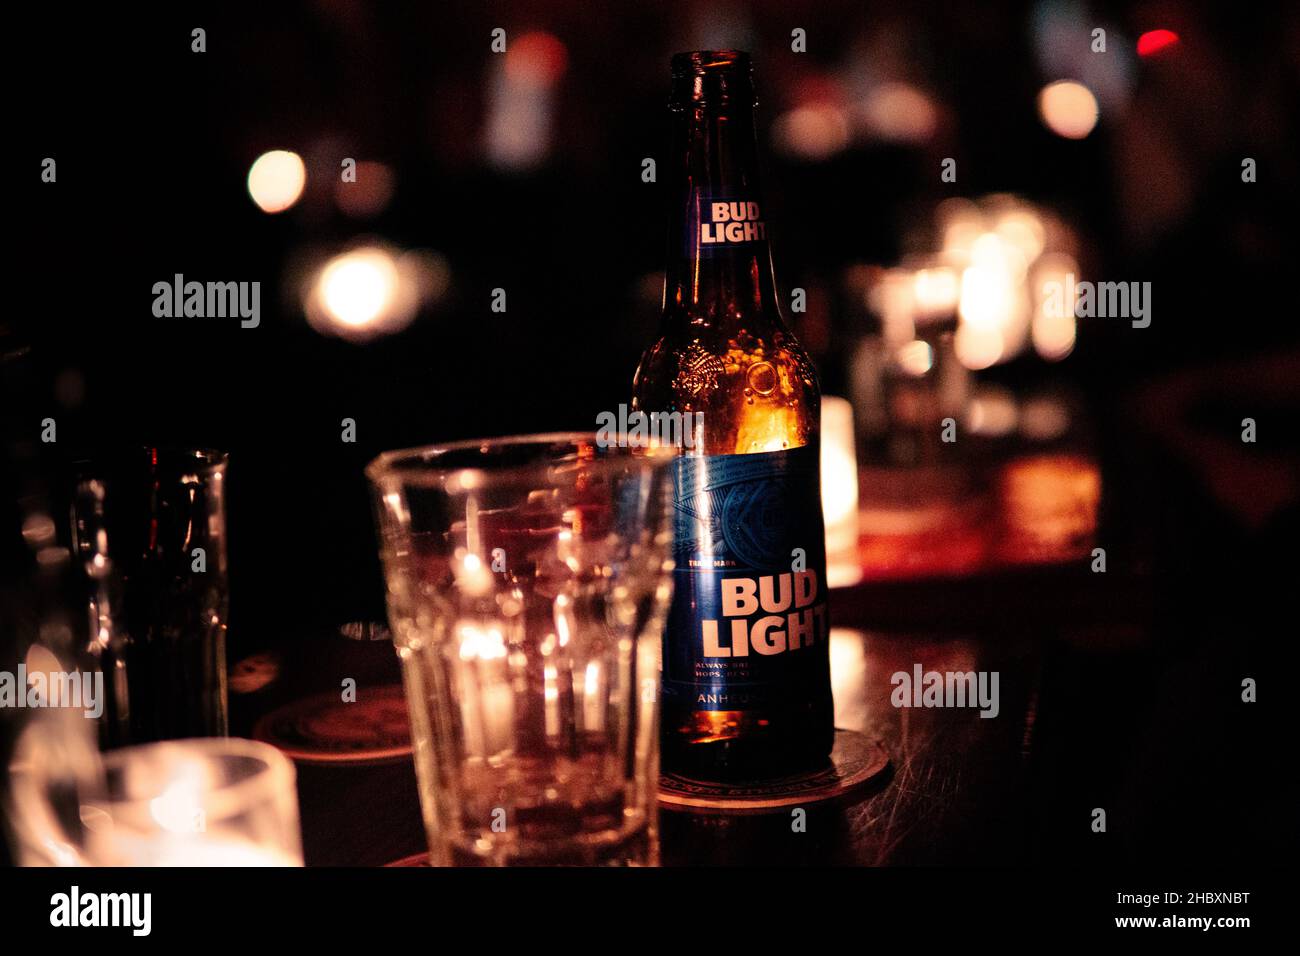 NEW YORK, UNITED STATES - Dec 06, 2019: A Bud Light beer and an empty glass at the counter in a New York bar Stock Photo